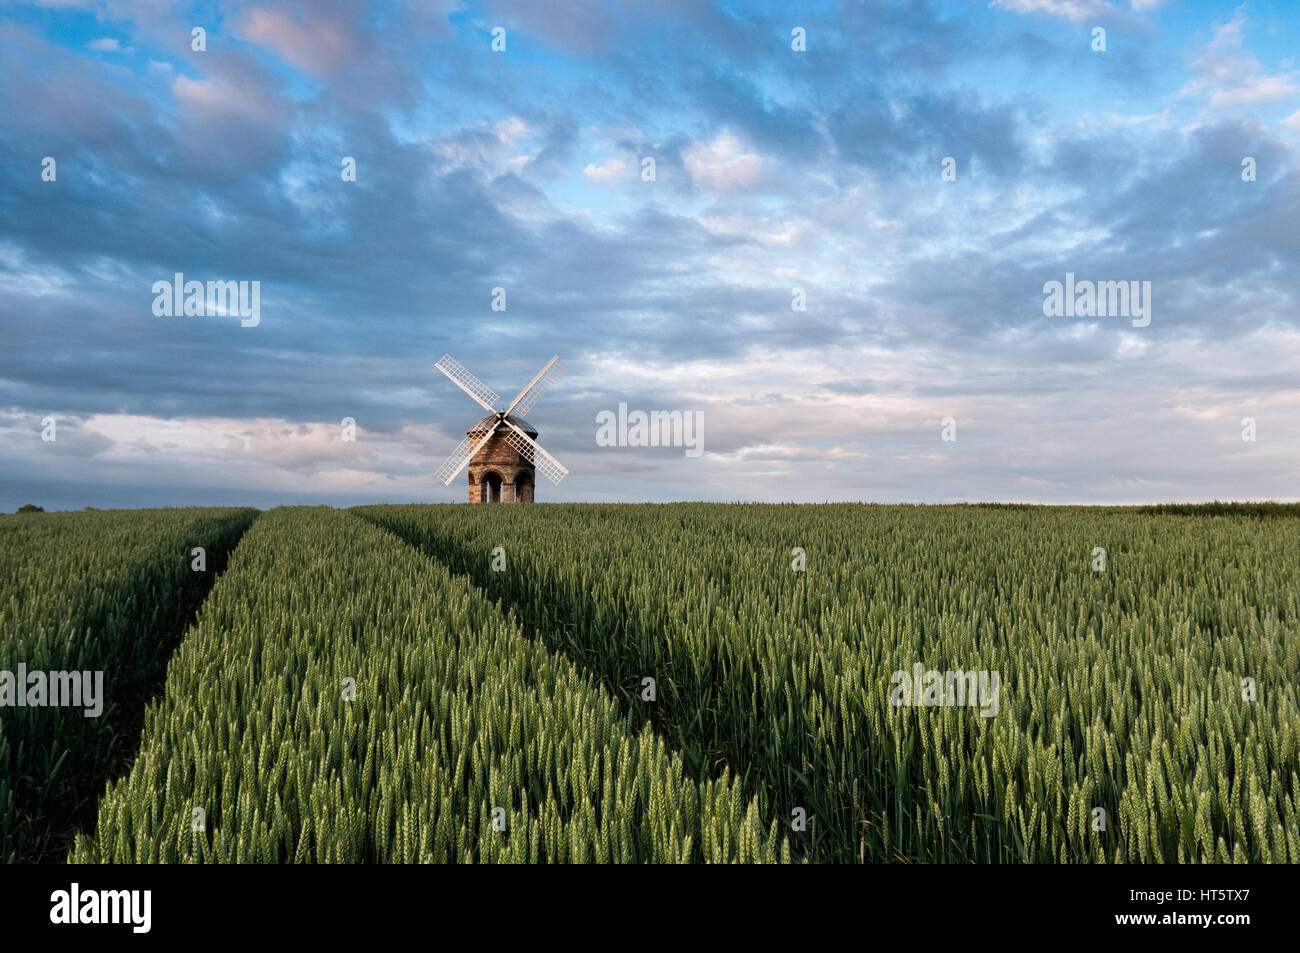 Chesterton Windmill in Summer with green wheat field in foreground, Warwickshire, United Kingdom Stock Photo